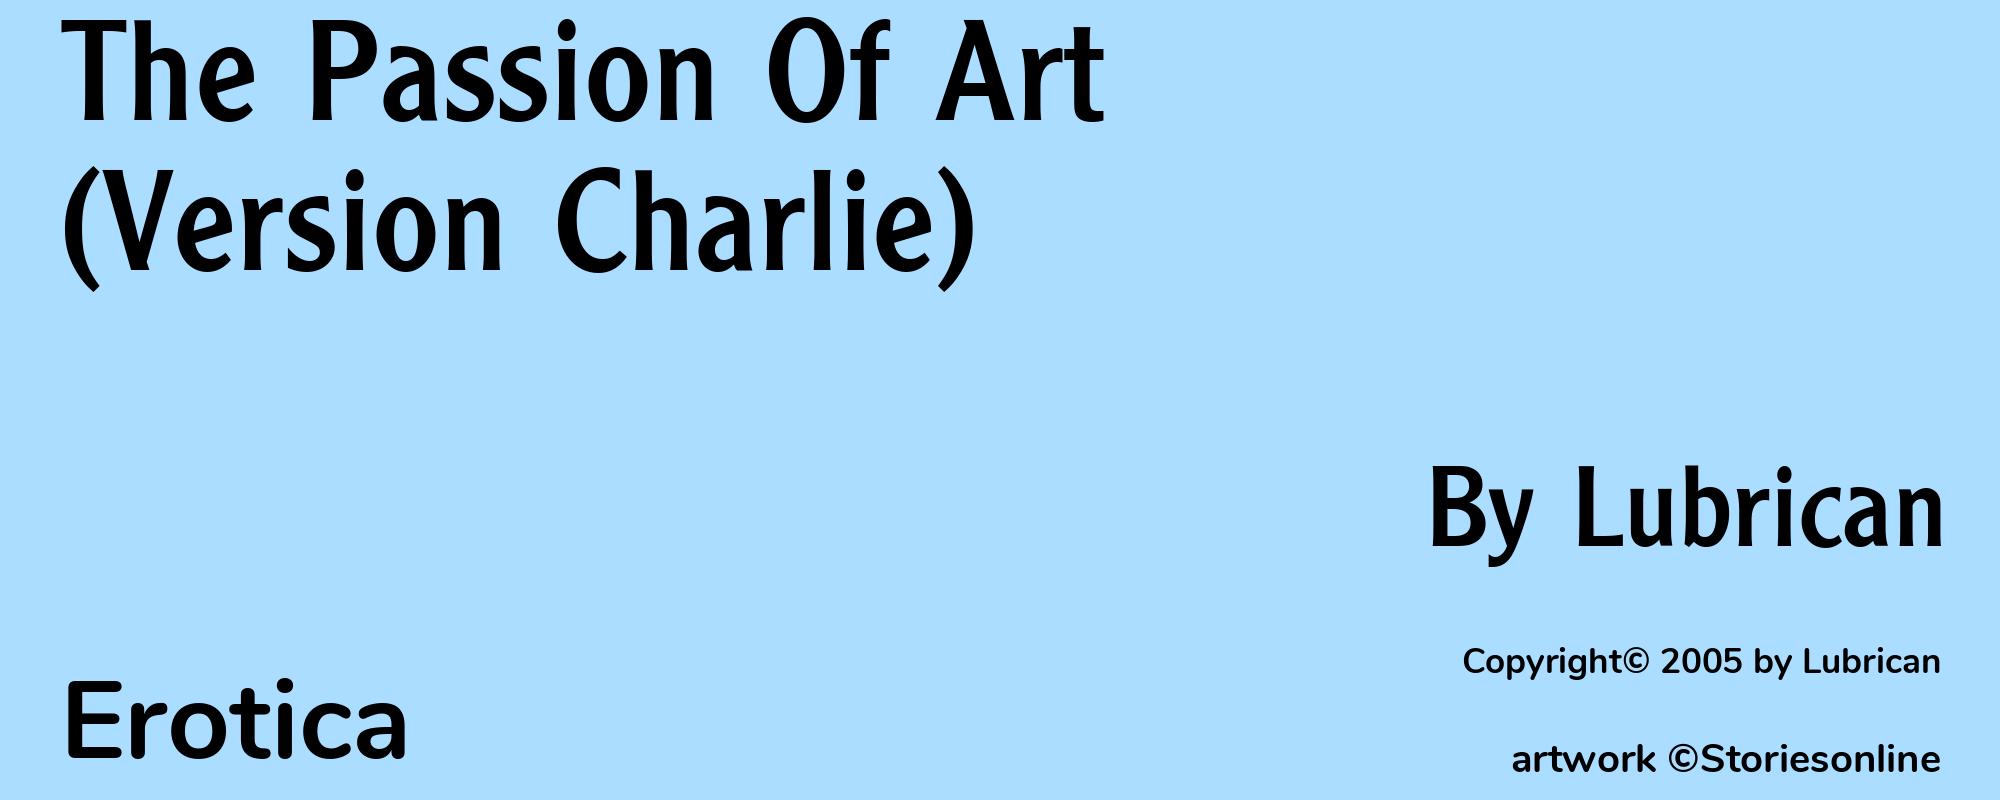 The Passion Of Art (Version Charlie) - Cover